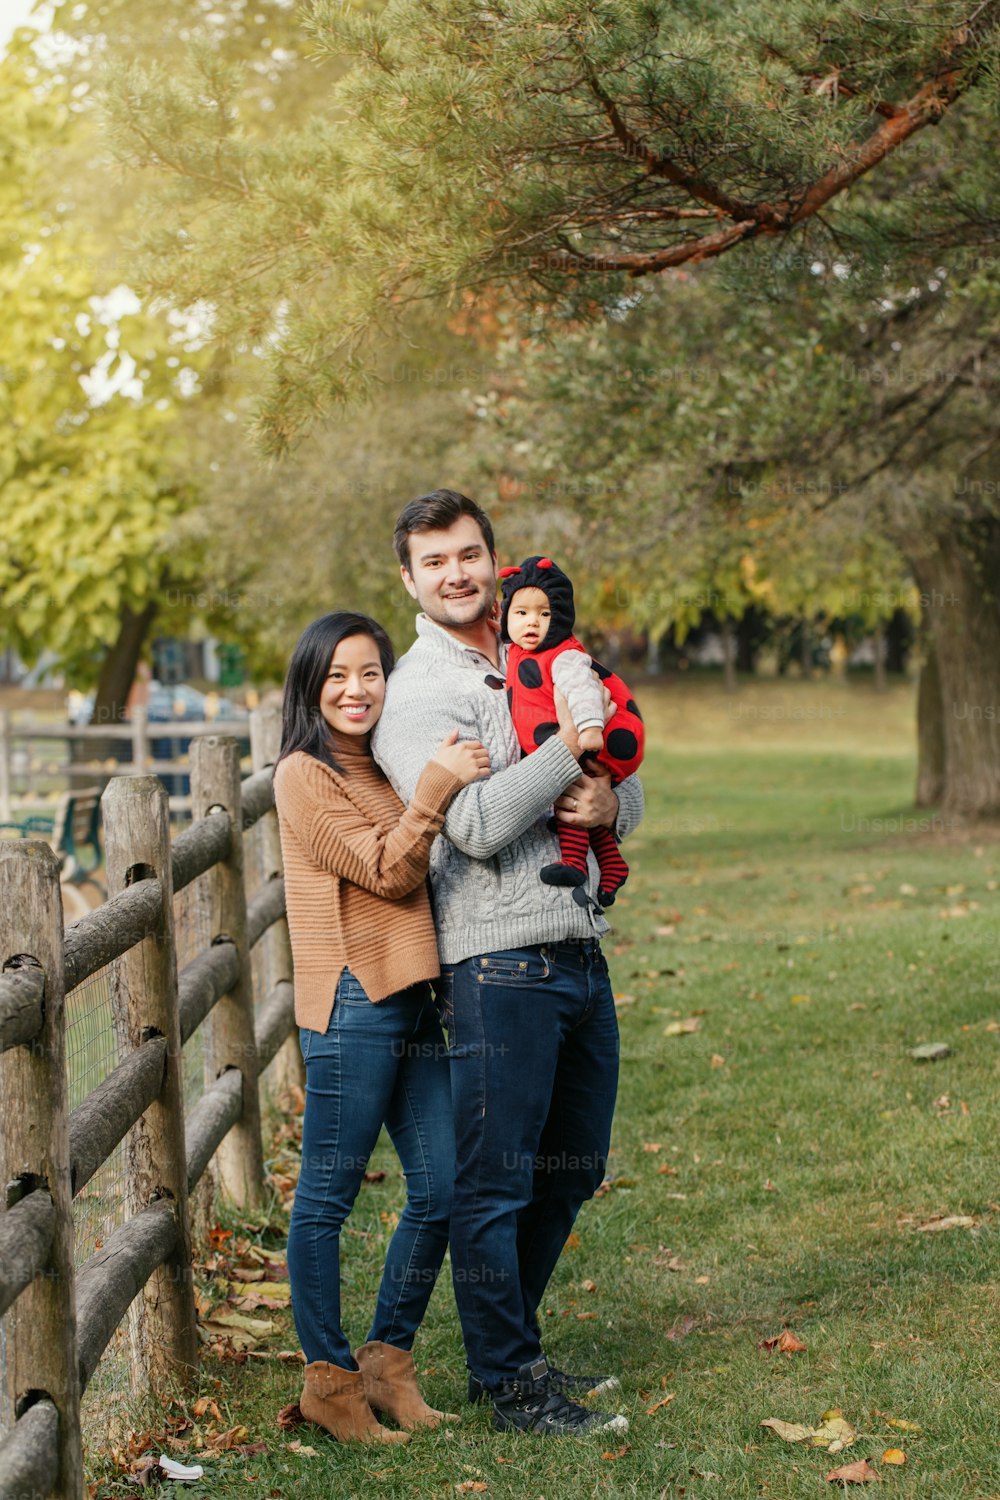 Happy Halloween. Smiling Asian Chinese mother and Caucasian father dad with baby girl in ladybug Halloween costume. Ethnic family in autumn fall park outdoor celebrating holiday.